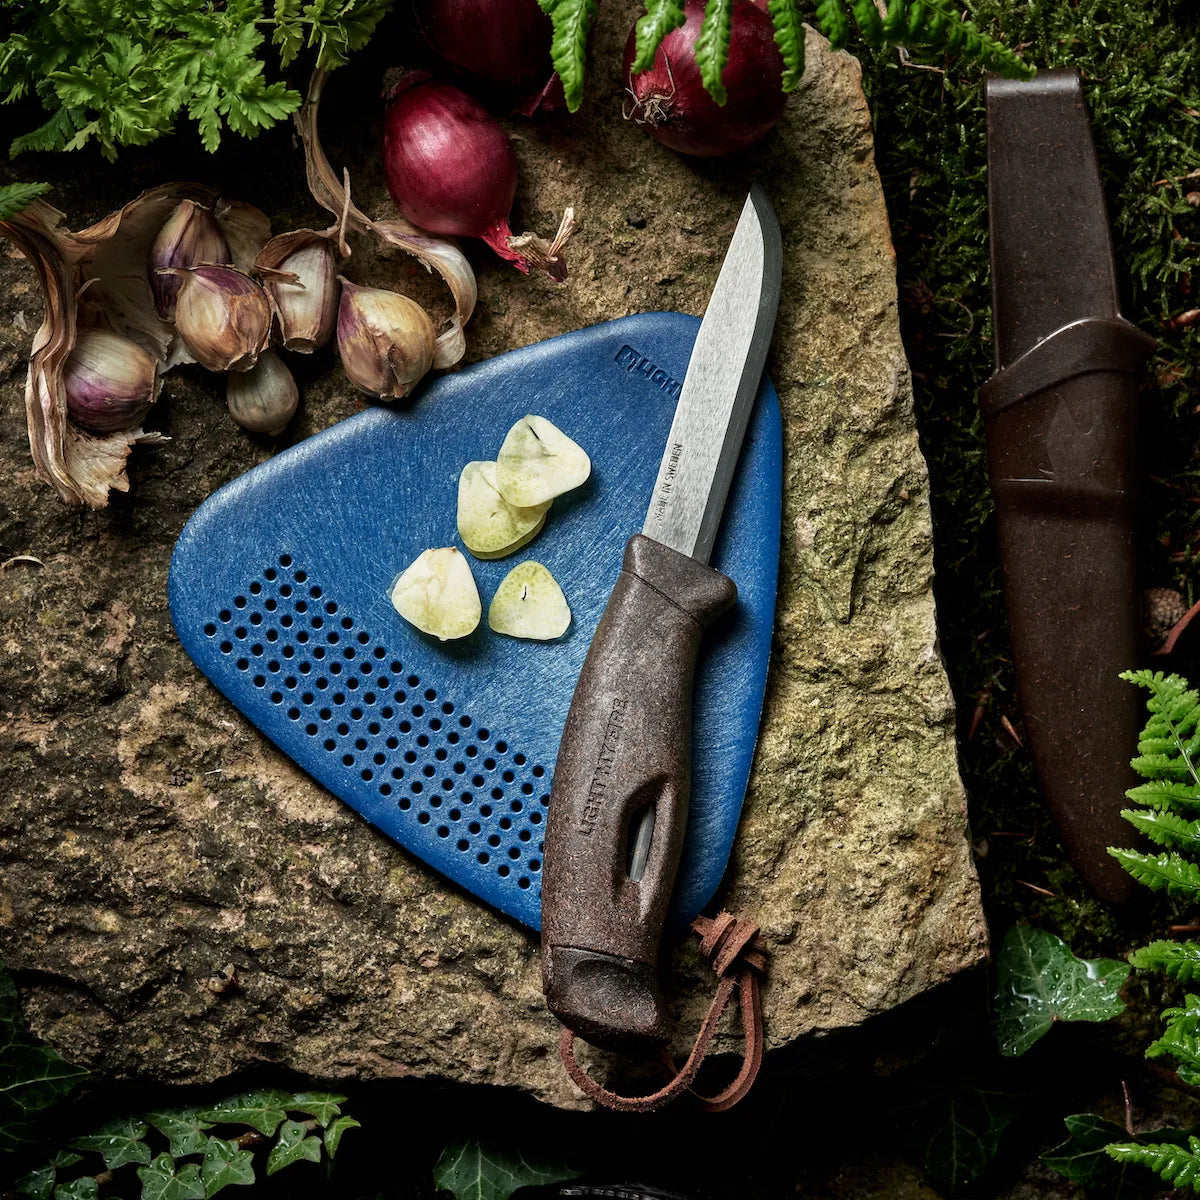 Brown knife on a blue cutting board next to food.